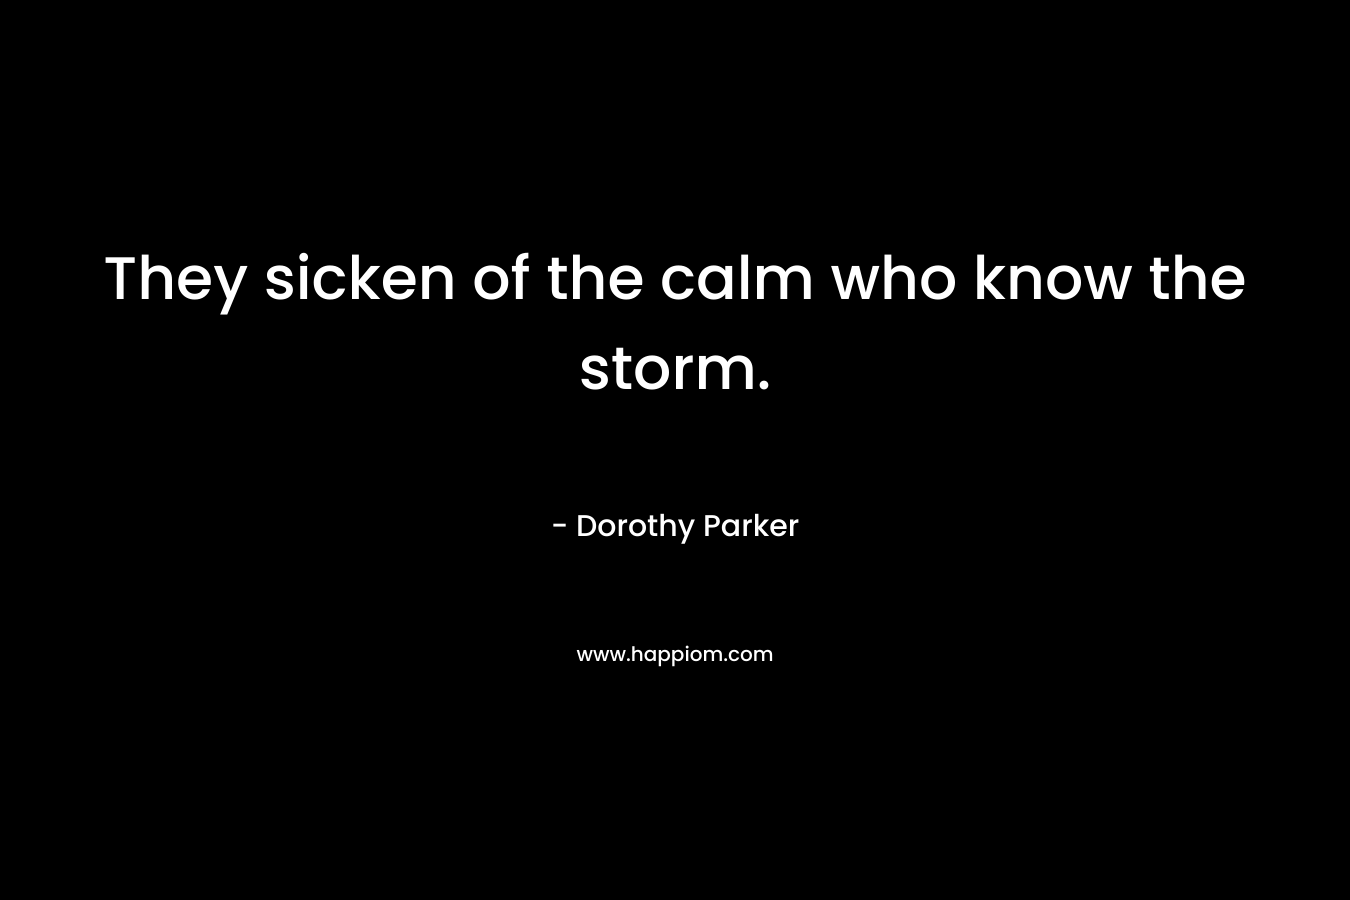 They sicken of the calm who know the storm.